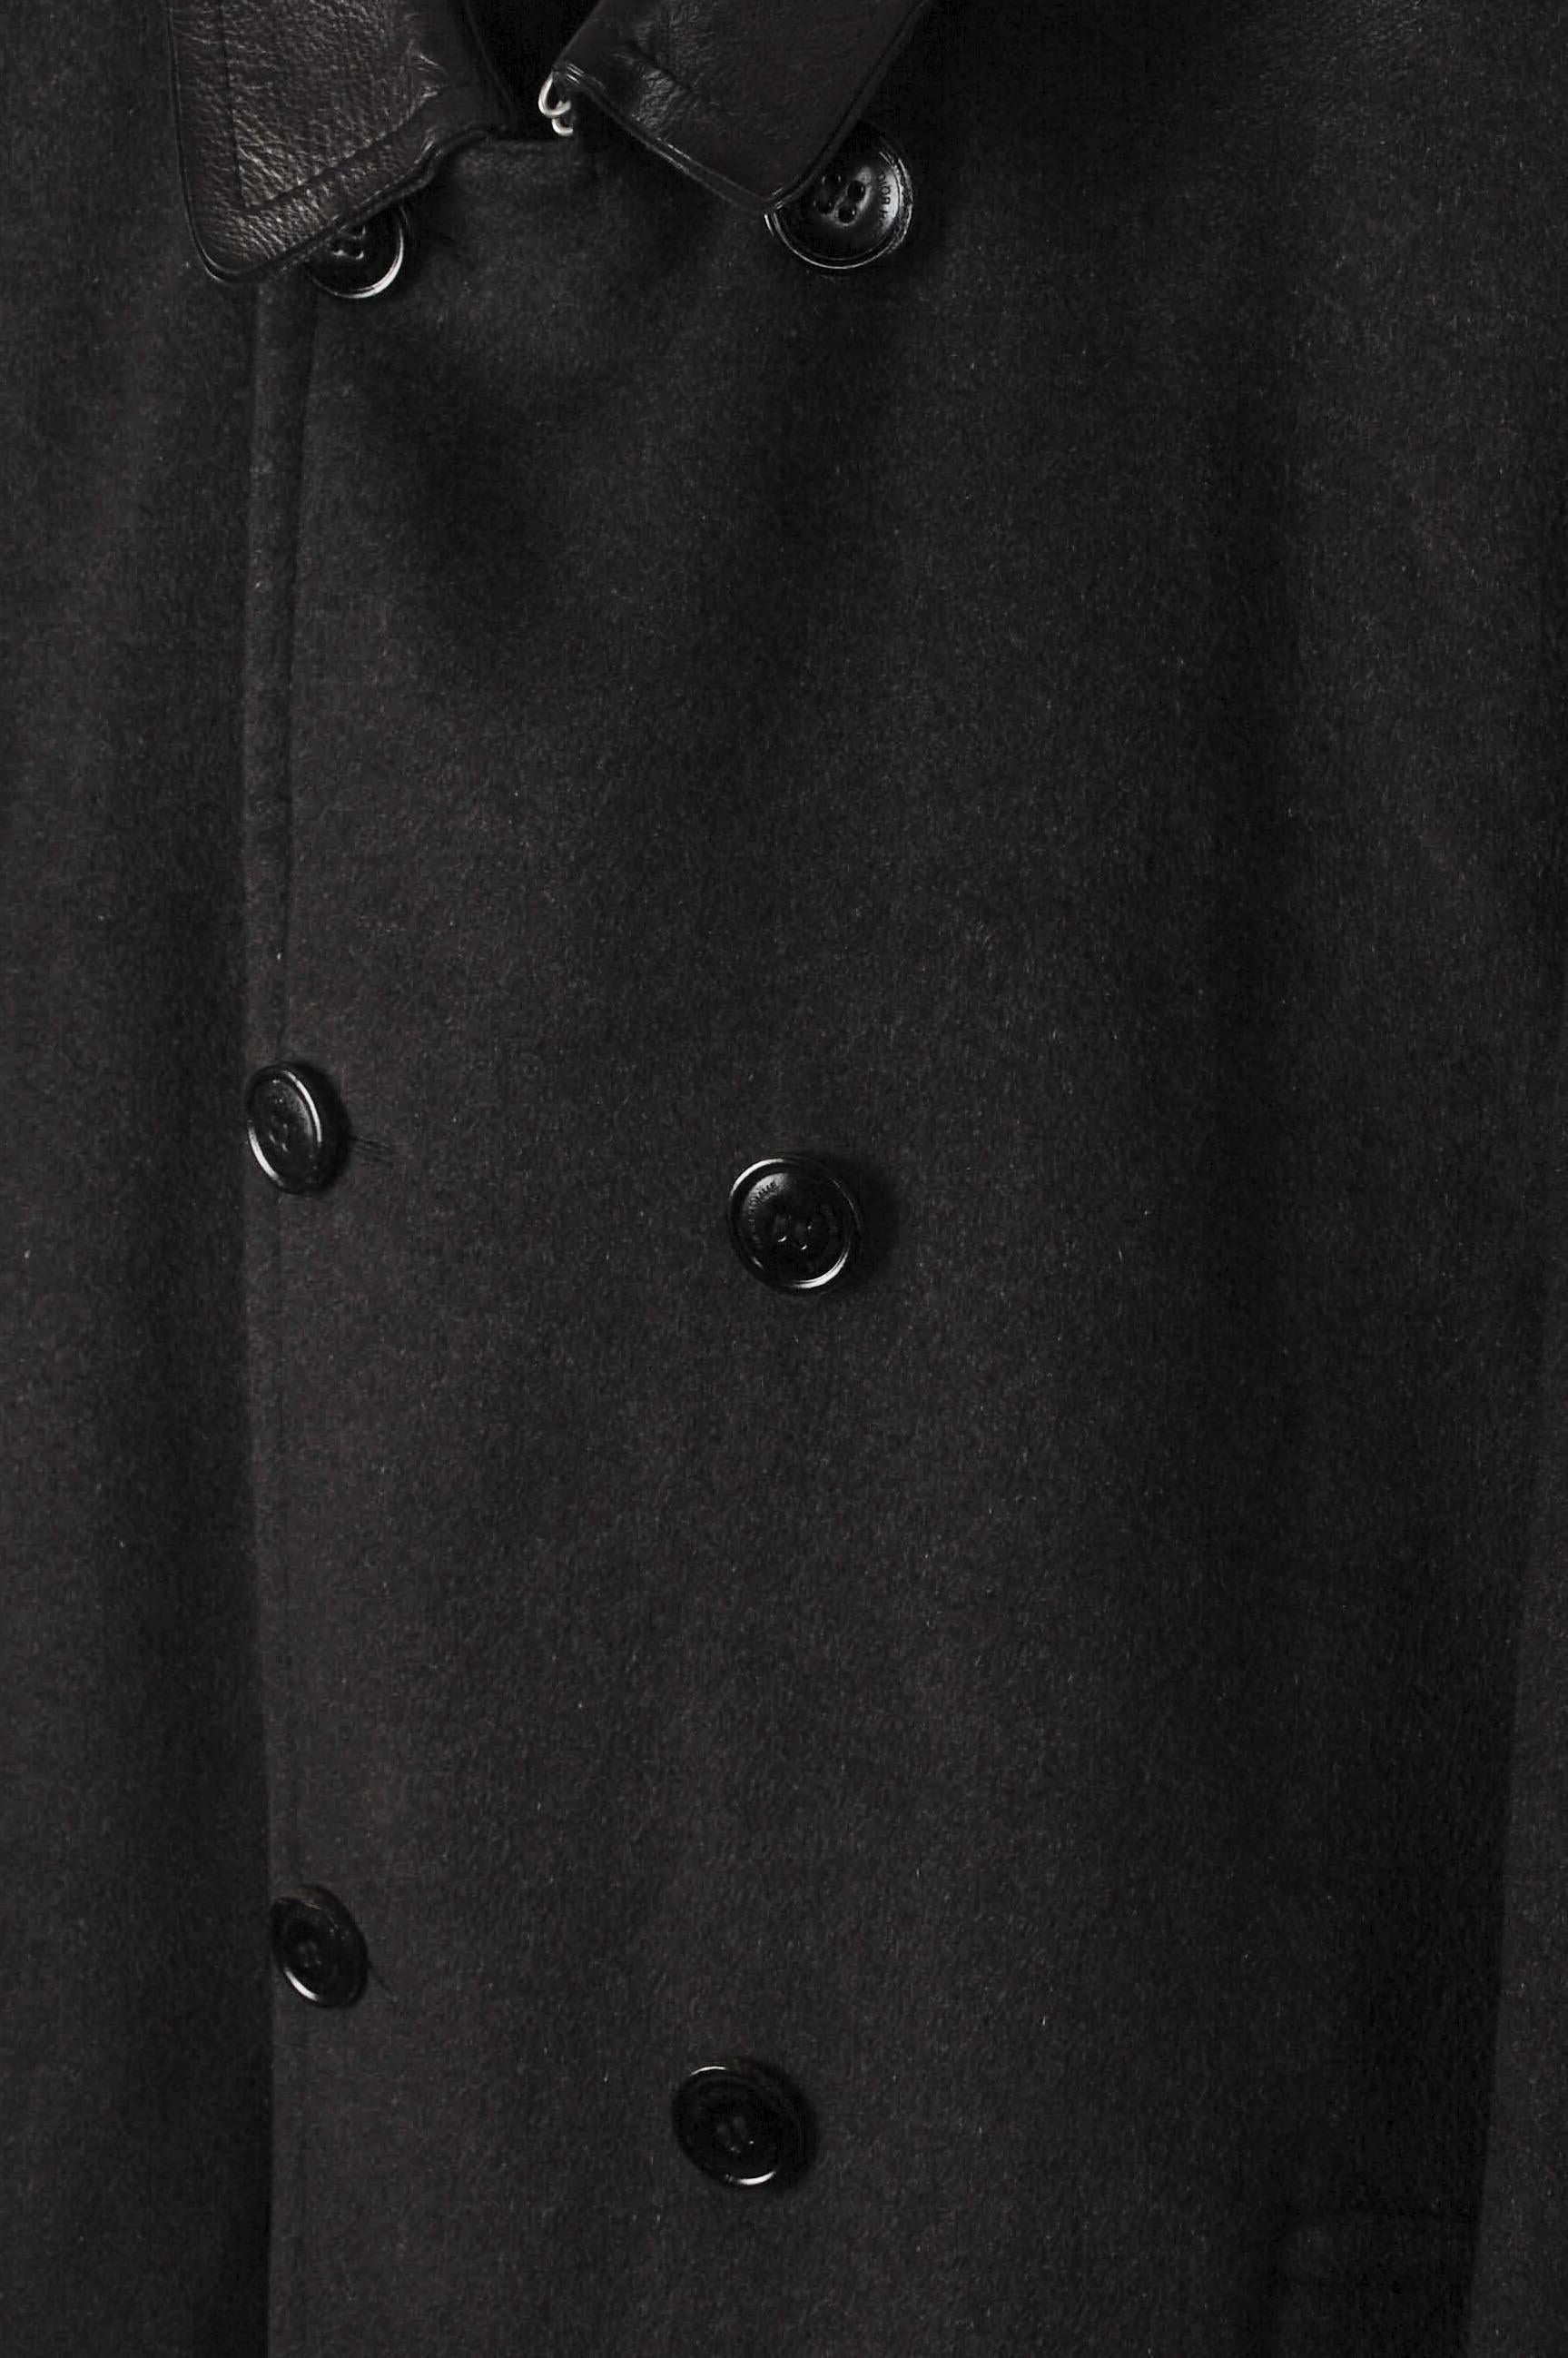 Item for sale is 100% genuine Dior Homme by Hedi Slimane Coat
Color: Dark Grey
(An actual color may a bit vary due to individual computer screen interpretation)
Material: No tag, seems wool cashmere blend
Tag size: 48IT (runs M/L)
This coat is great